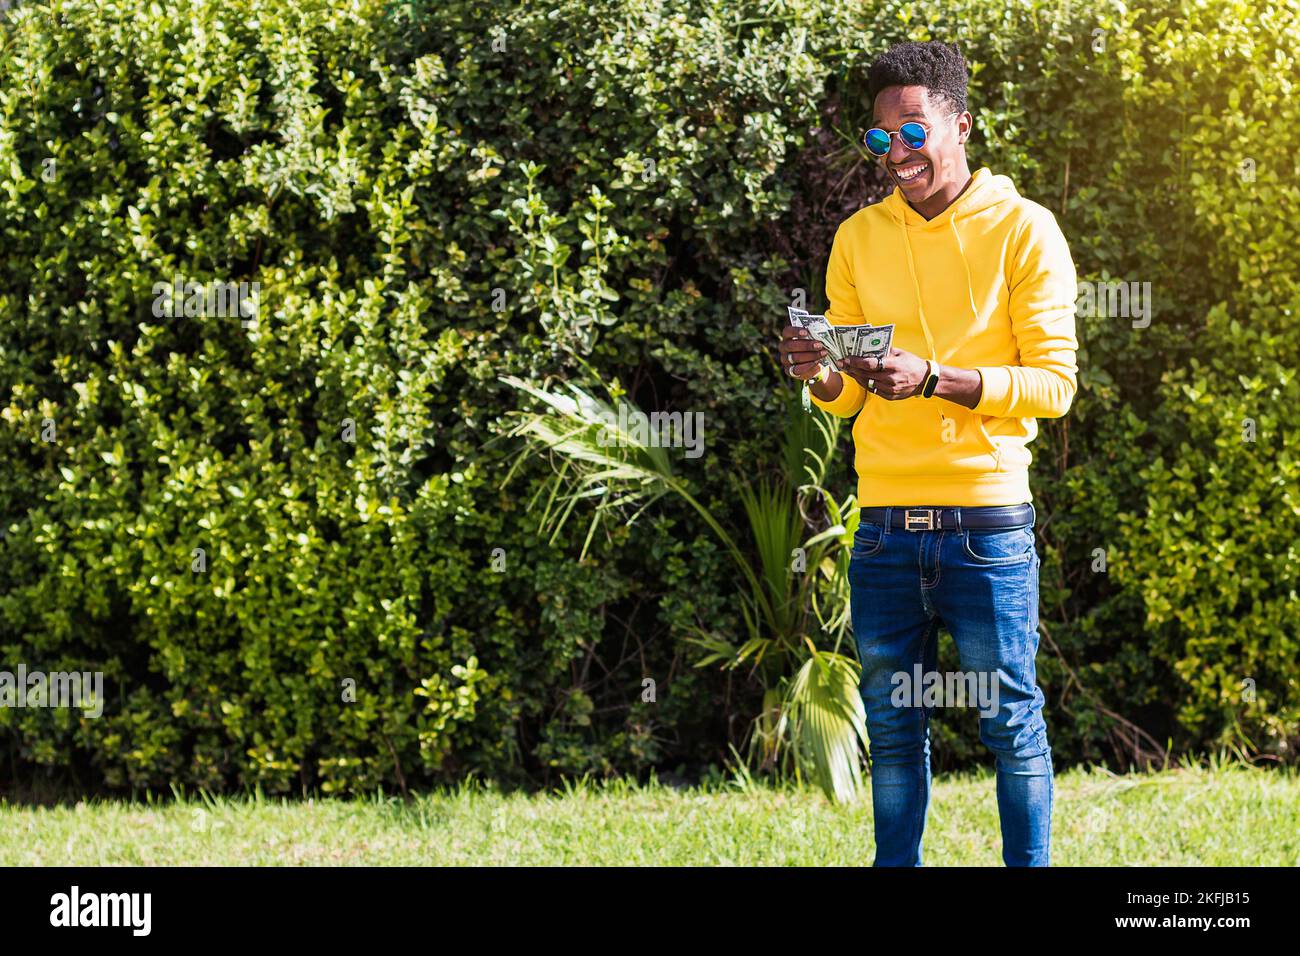 A smiling young African man dressed in a yellow sweatshirt, blue jeans and sunglasses counting money on the street passing bills between his hands. Stock Photo